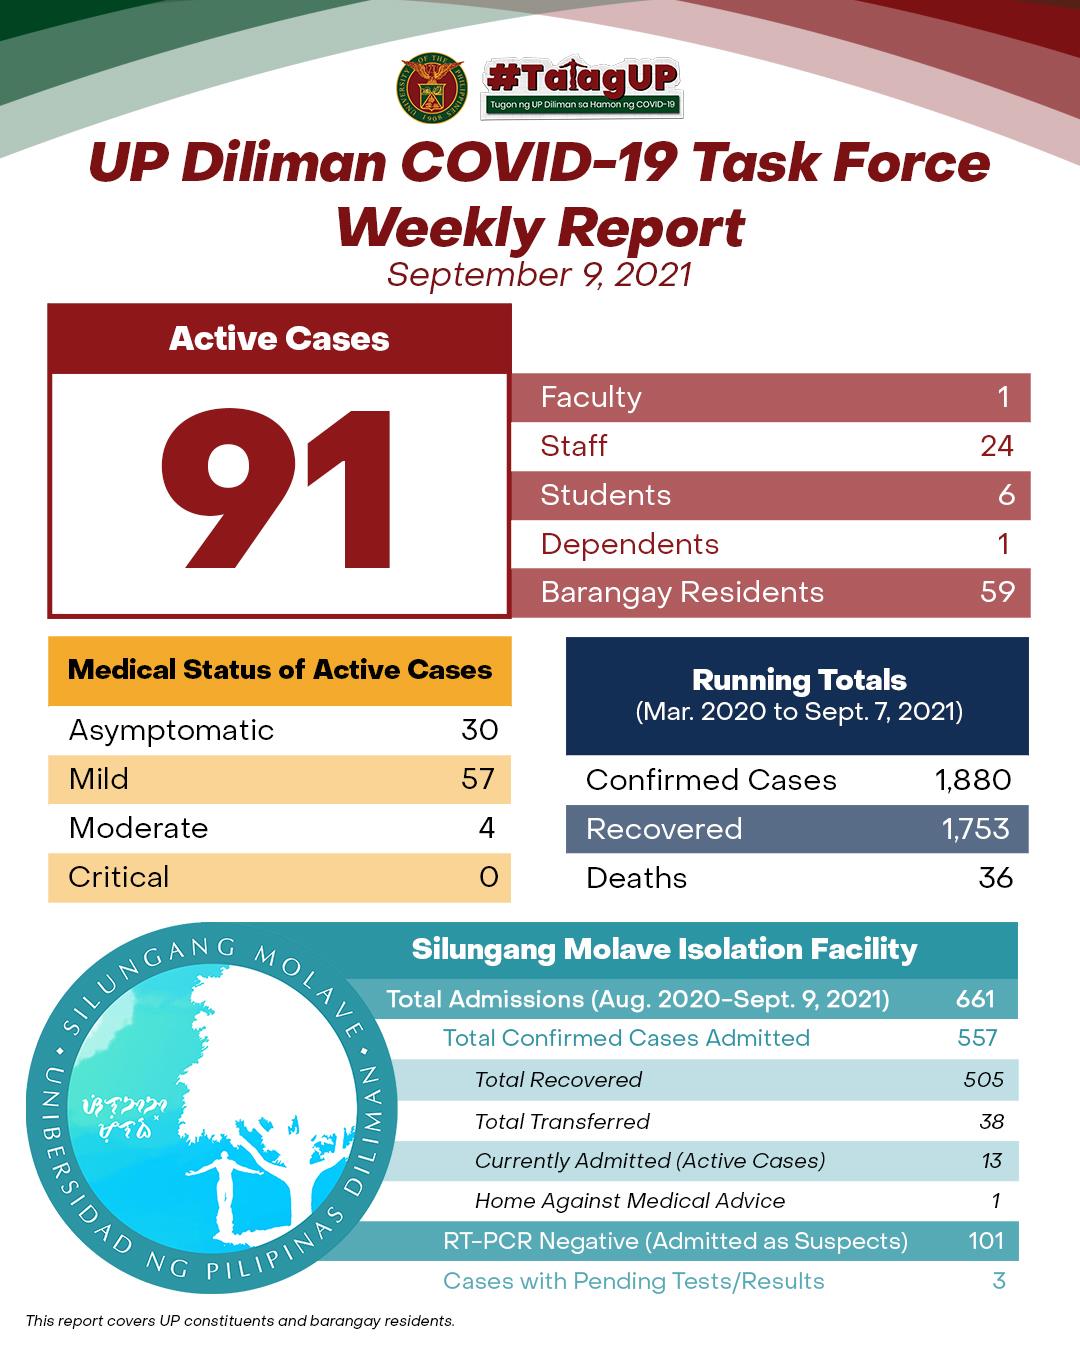 UP Diliman COVID-19 Task Force Weekly Report (September 9, 2021)